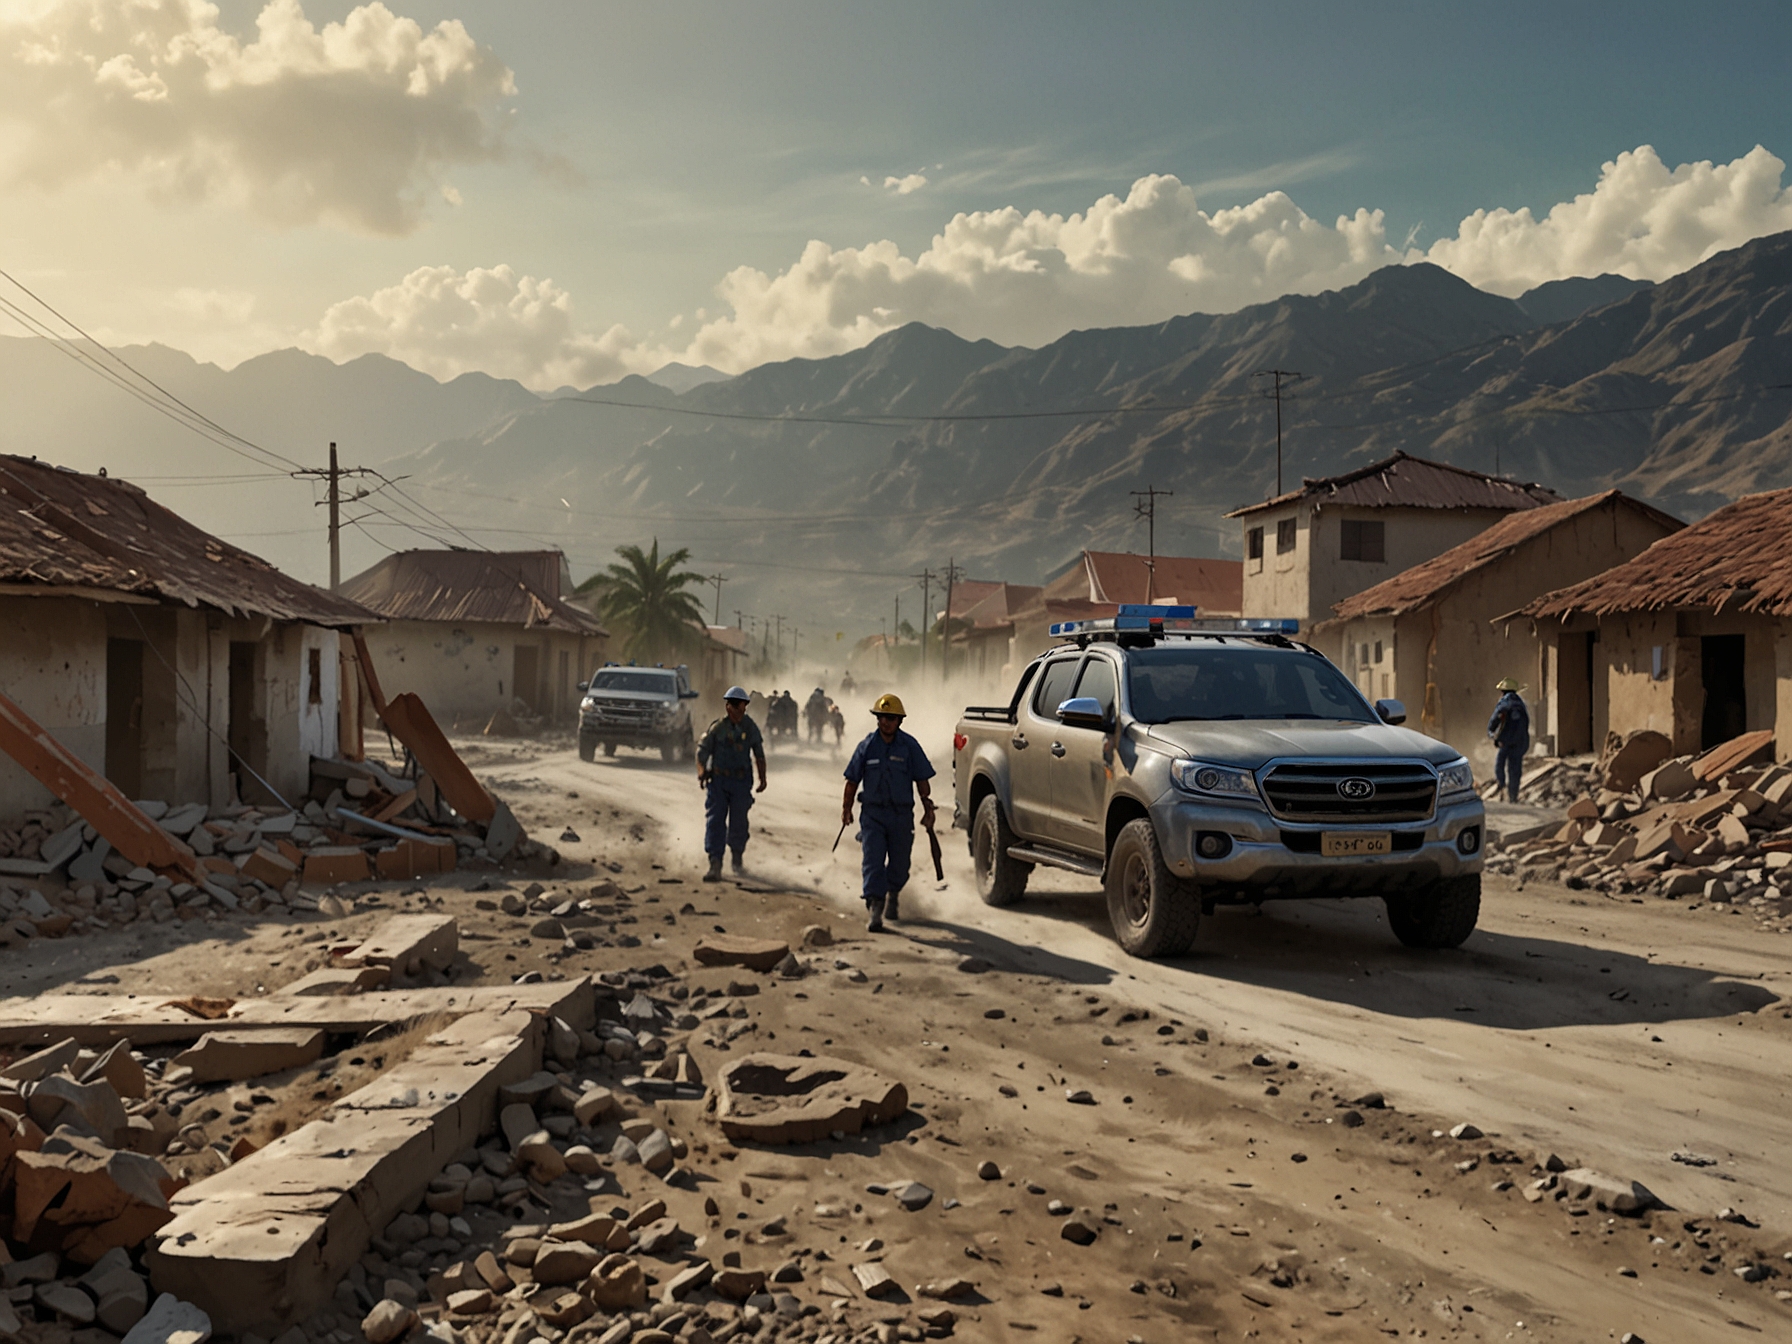 Emergency response teams delivering aid to affected communities in southern Peru, with damaged infrastructure and disrupted roads visible in the background after the earthquake.